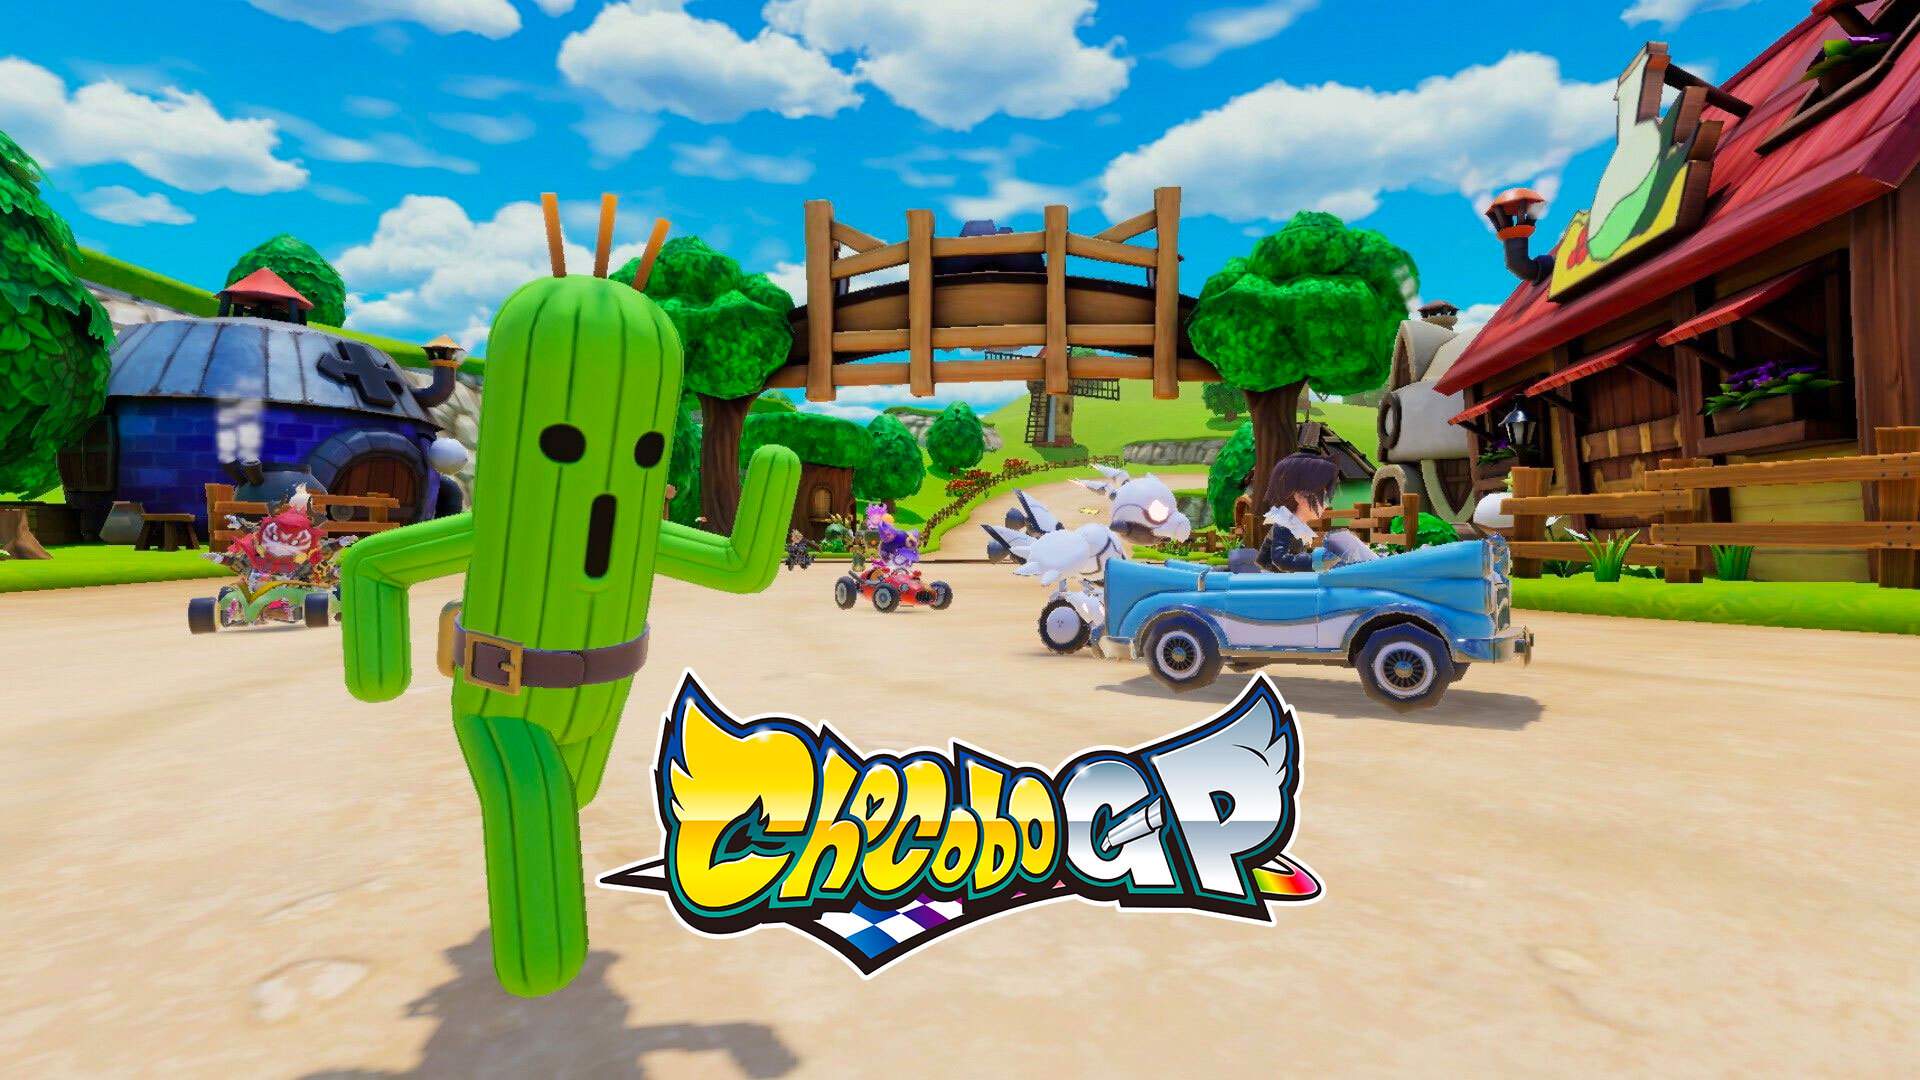 Cactuar, an anthropomorphic cactus, is walking on a racetrack with karts in the background.